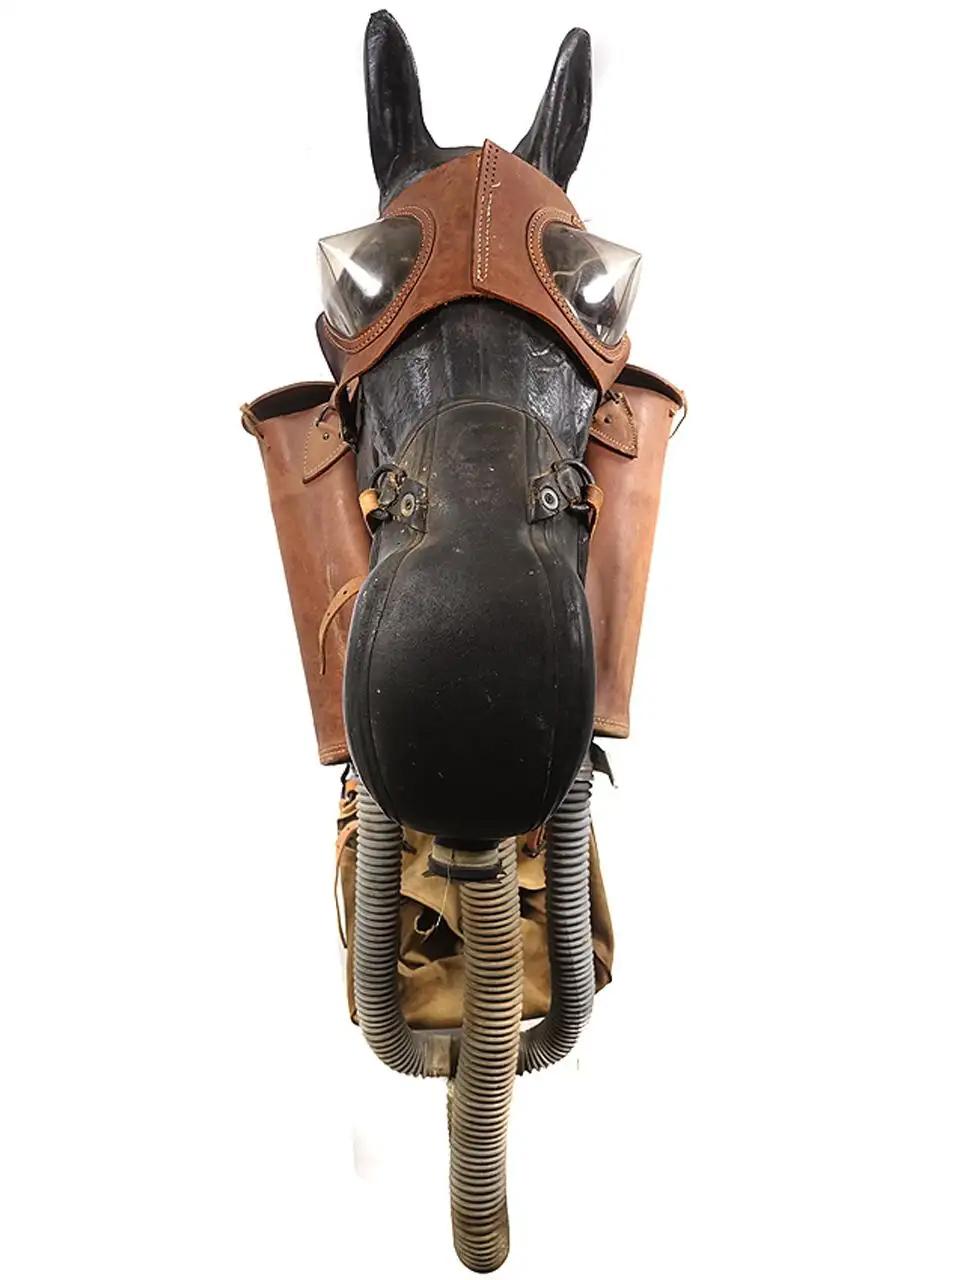 M4 US Government Army Issue World War II, vintage 1941-1942 Horse Gas Masks are very scarce. Due to the large size, most were discarded after the war. Occasionally, one will pop up, but most are incomplete or in poor condition. The M4 Horse Gas Mask